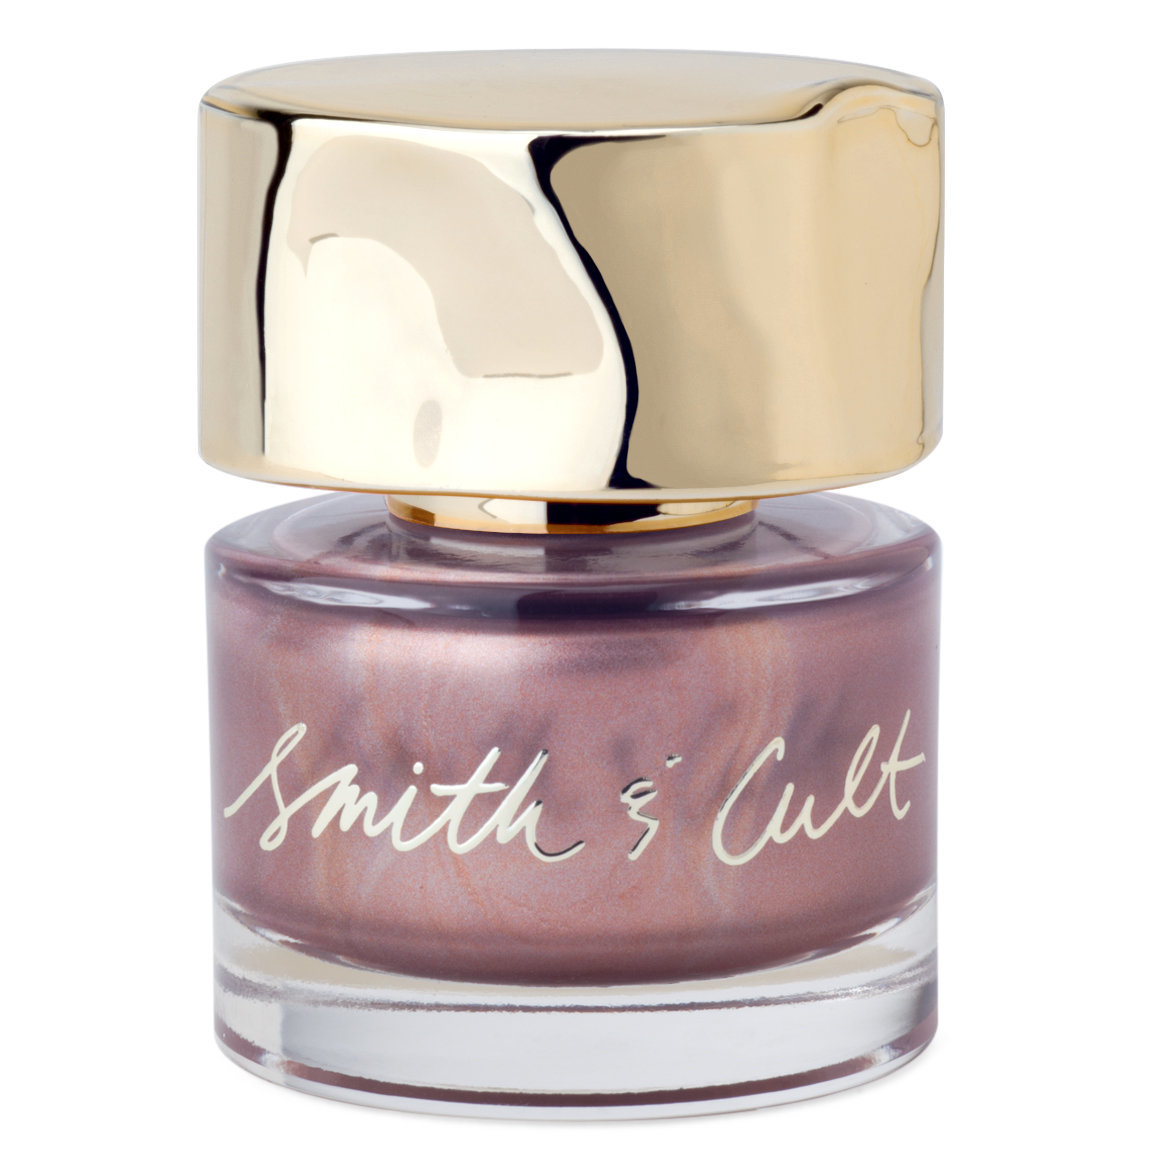 Smith & Cult Nailed Lacquer 1972 alternative view 1.